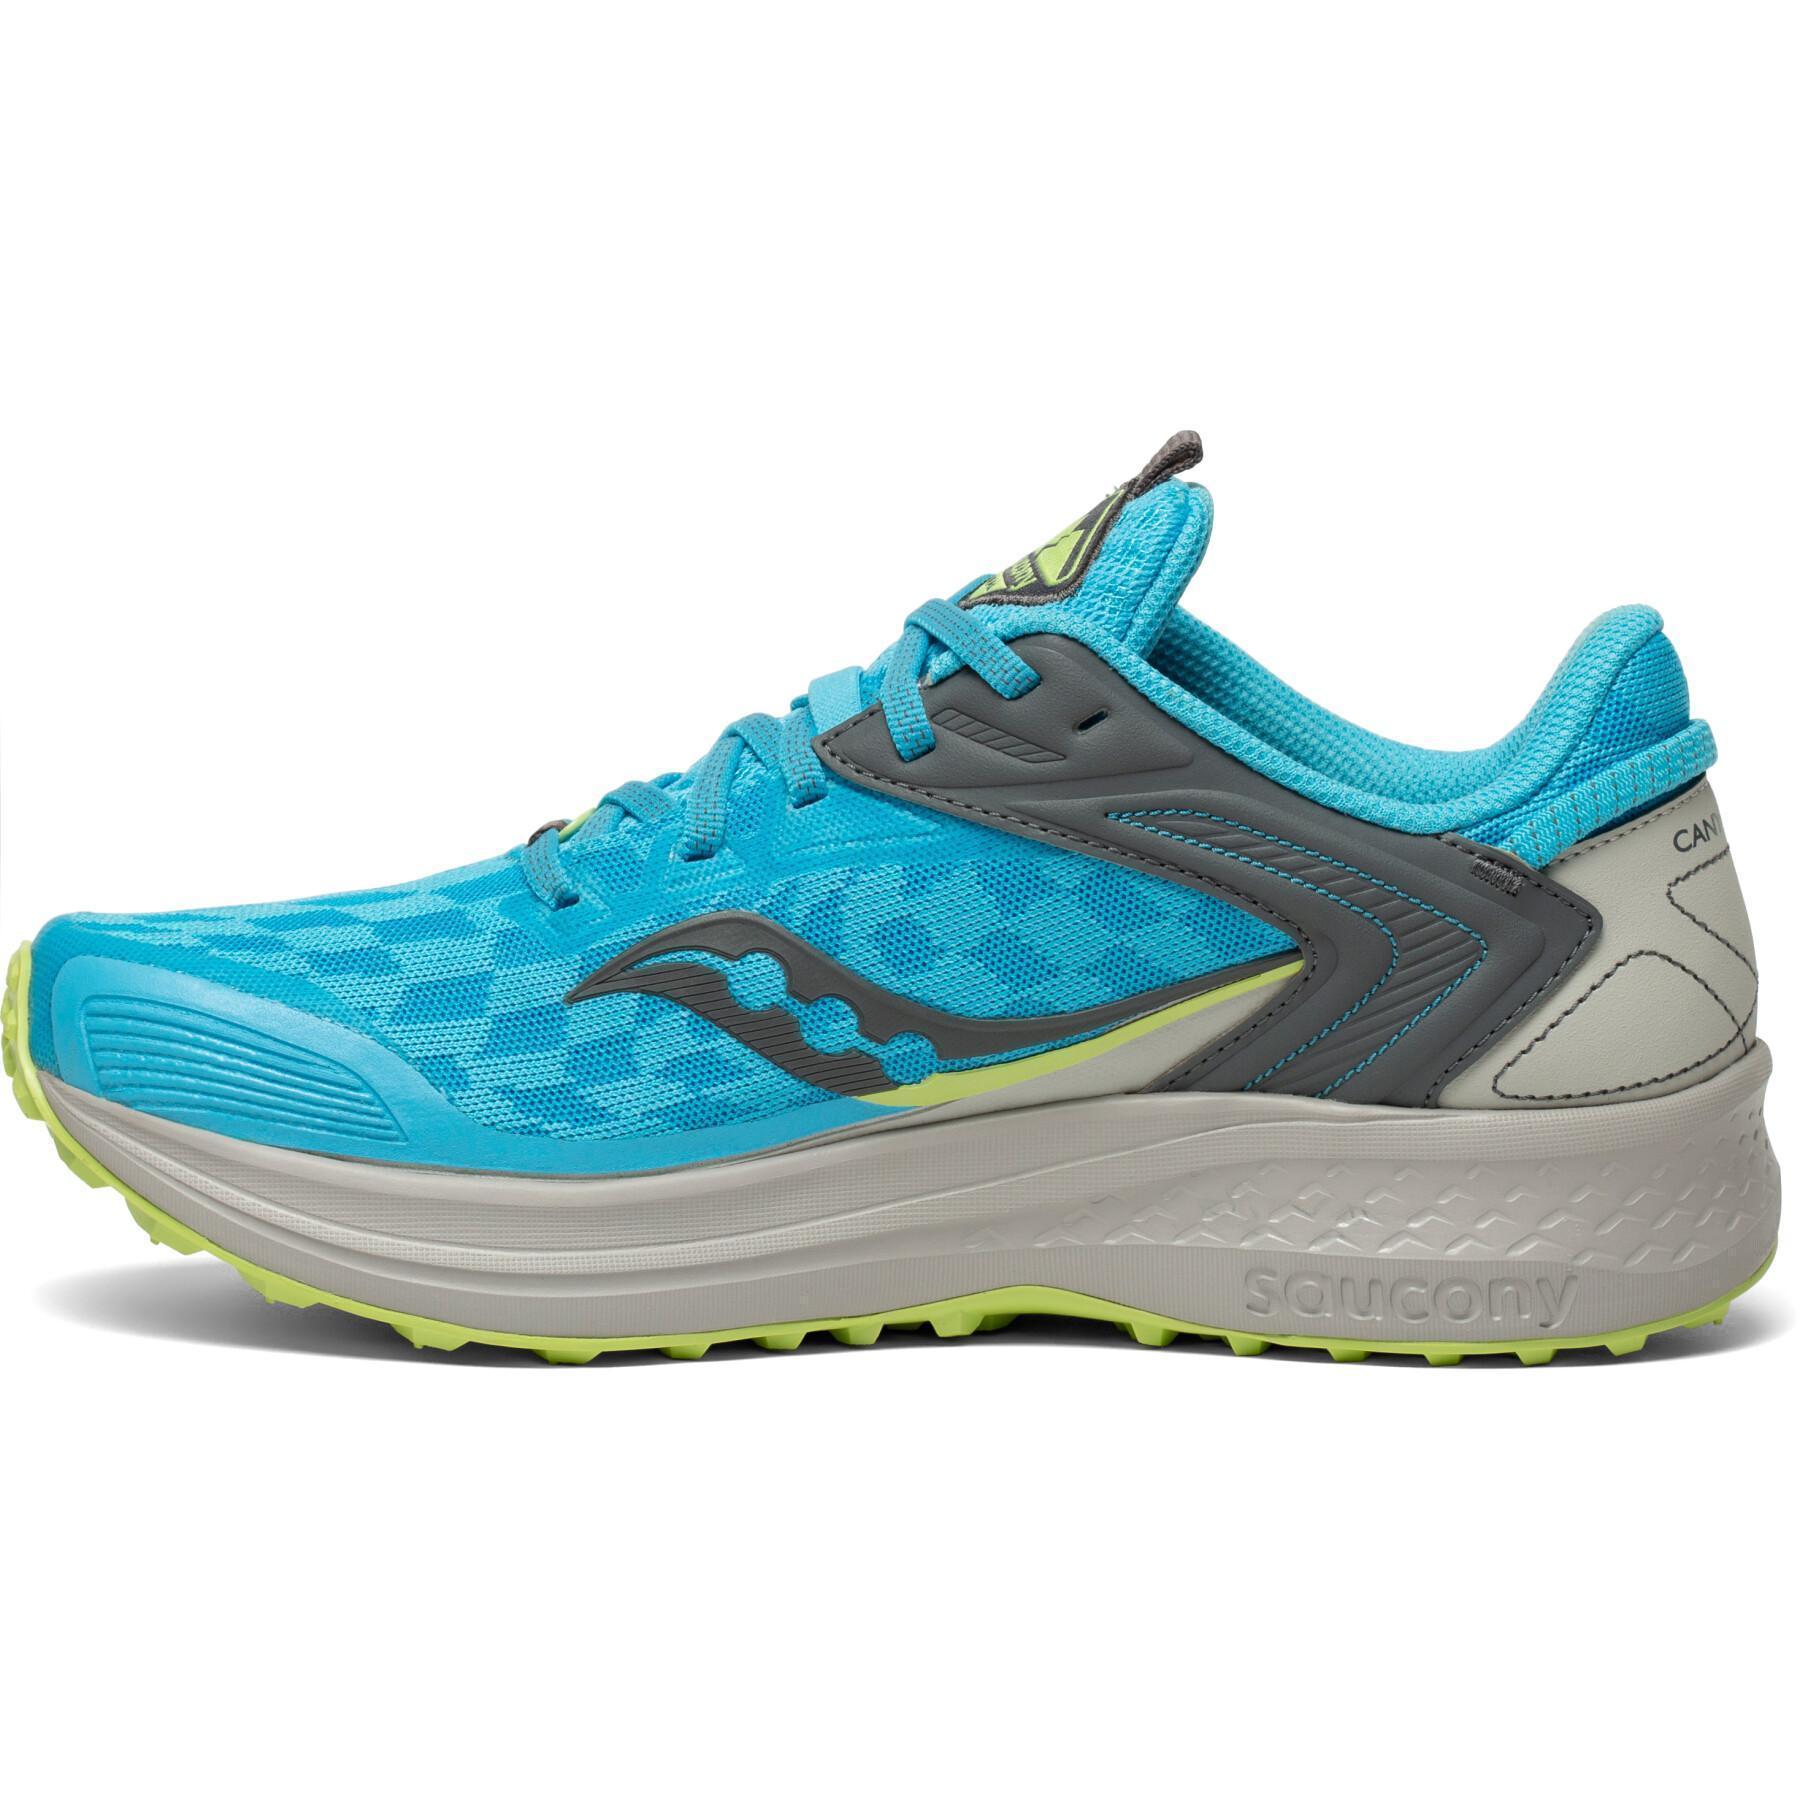 Chaussures femme Saucony canyon tr2